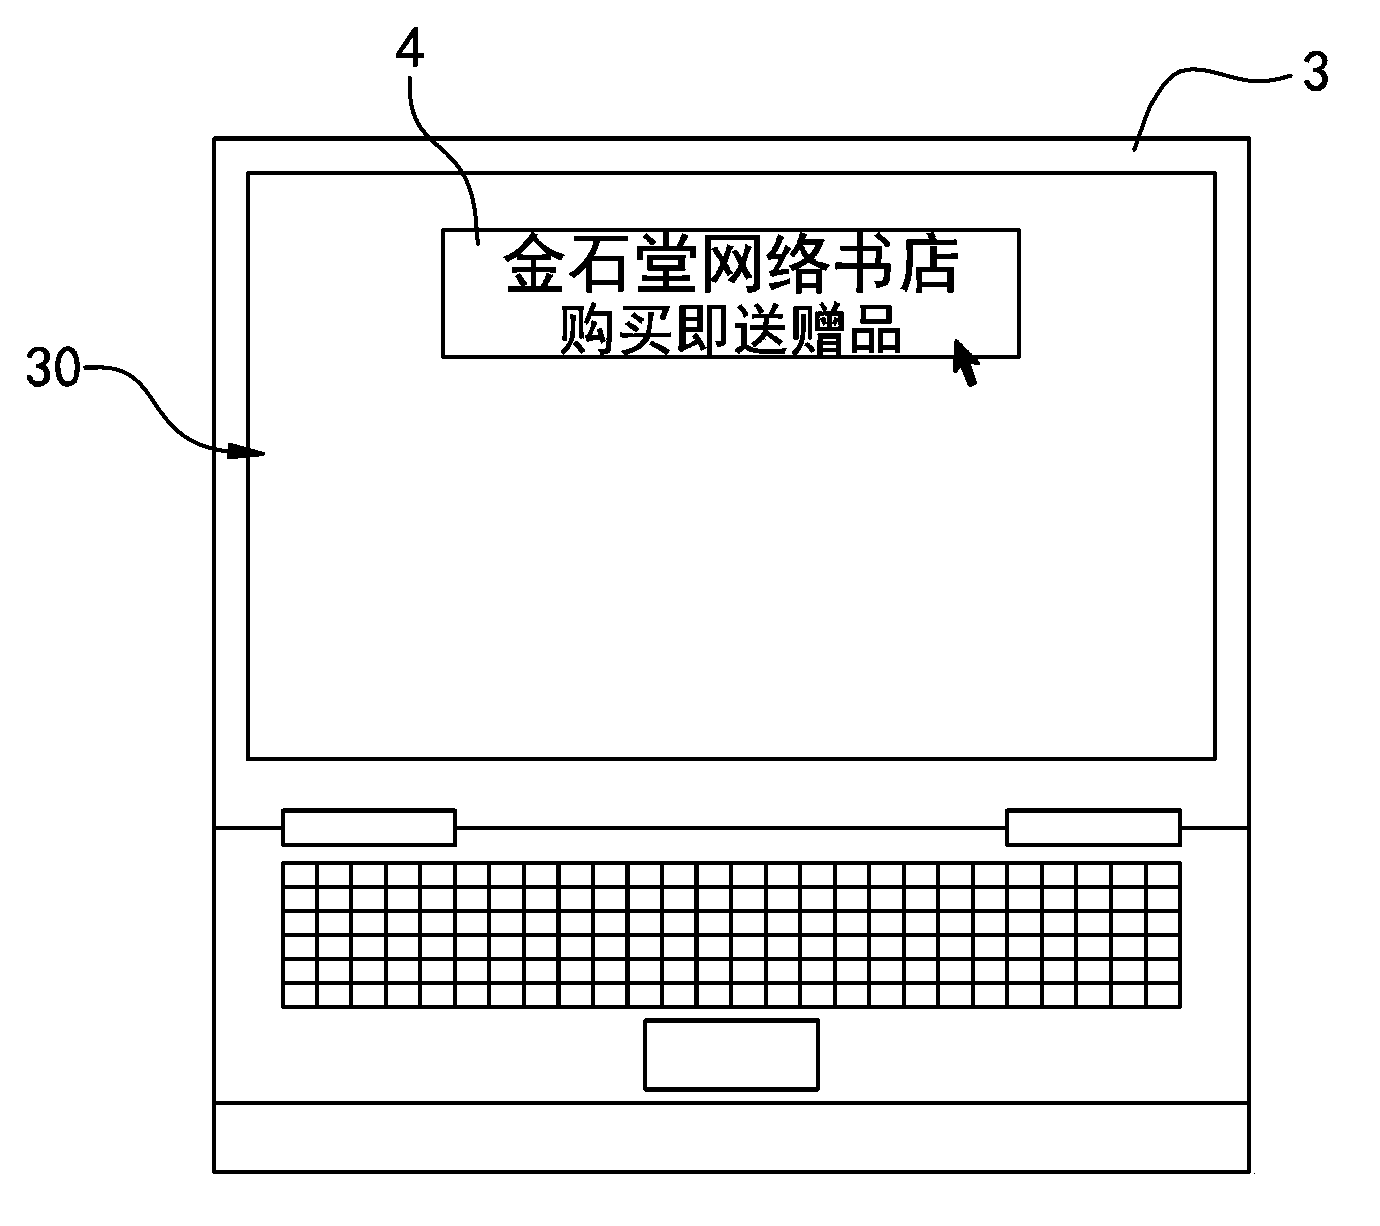 Online shopping system for stimulating consumption through advertising and method thereof